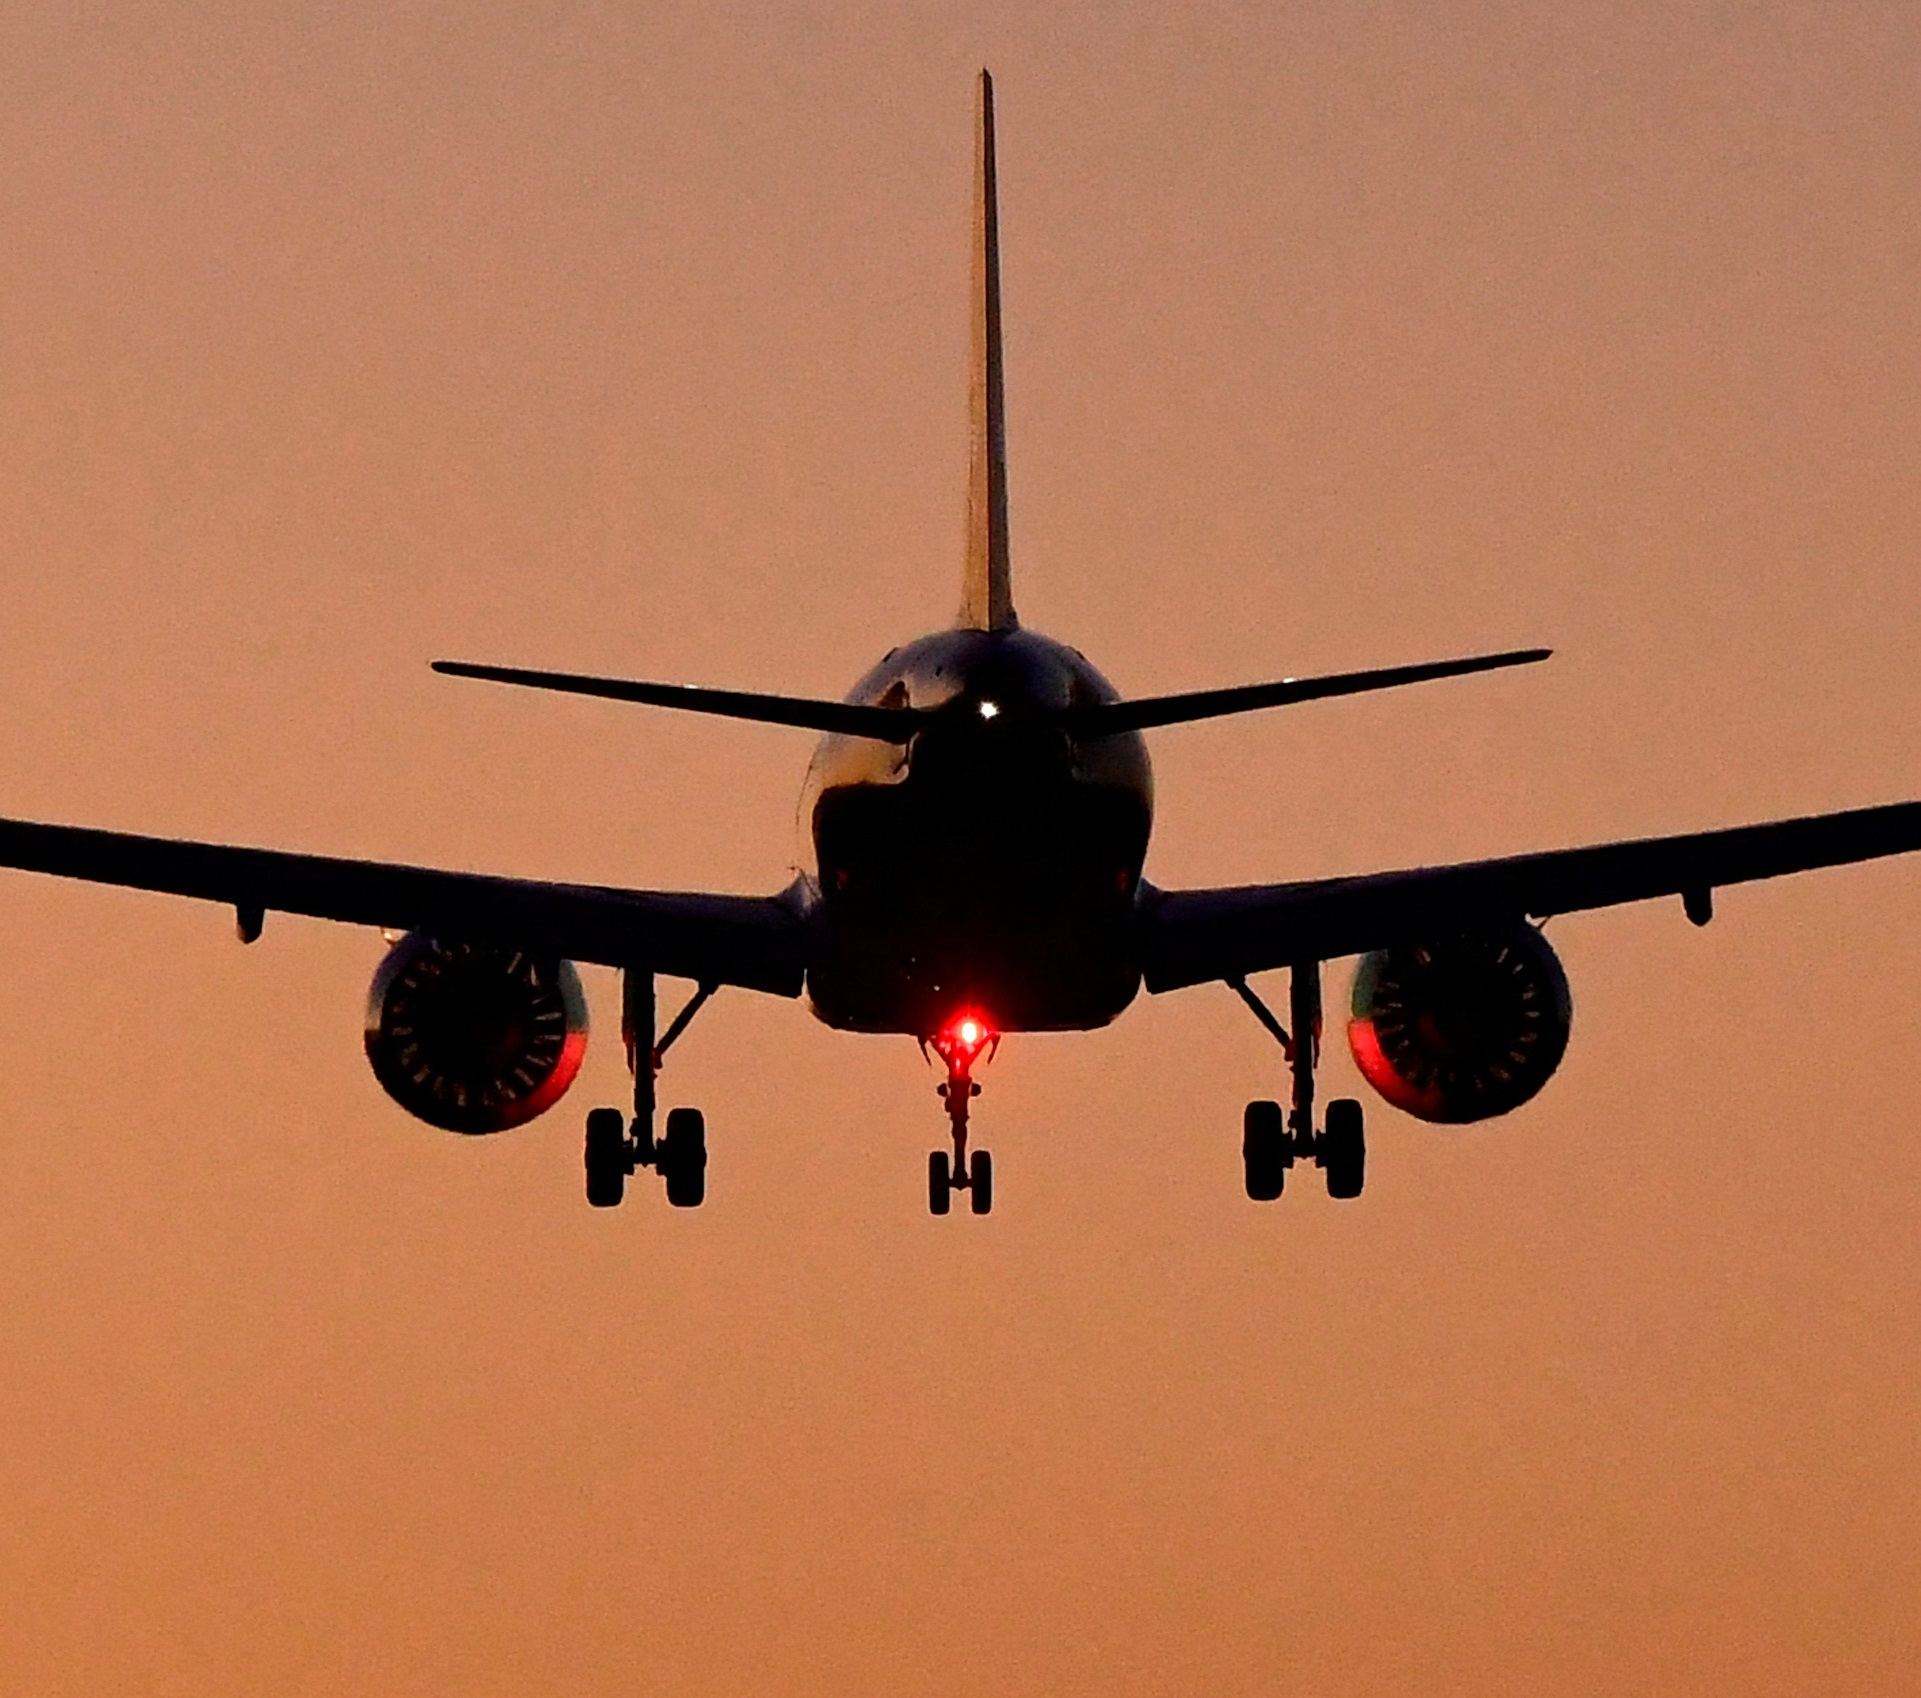 A passenger aircraft descends to land at Heathrow Airport in London